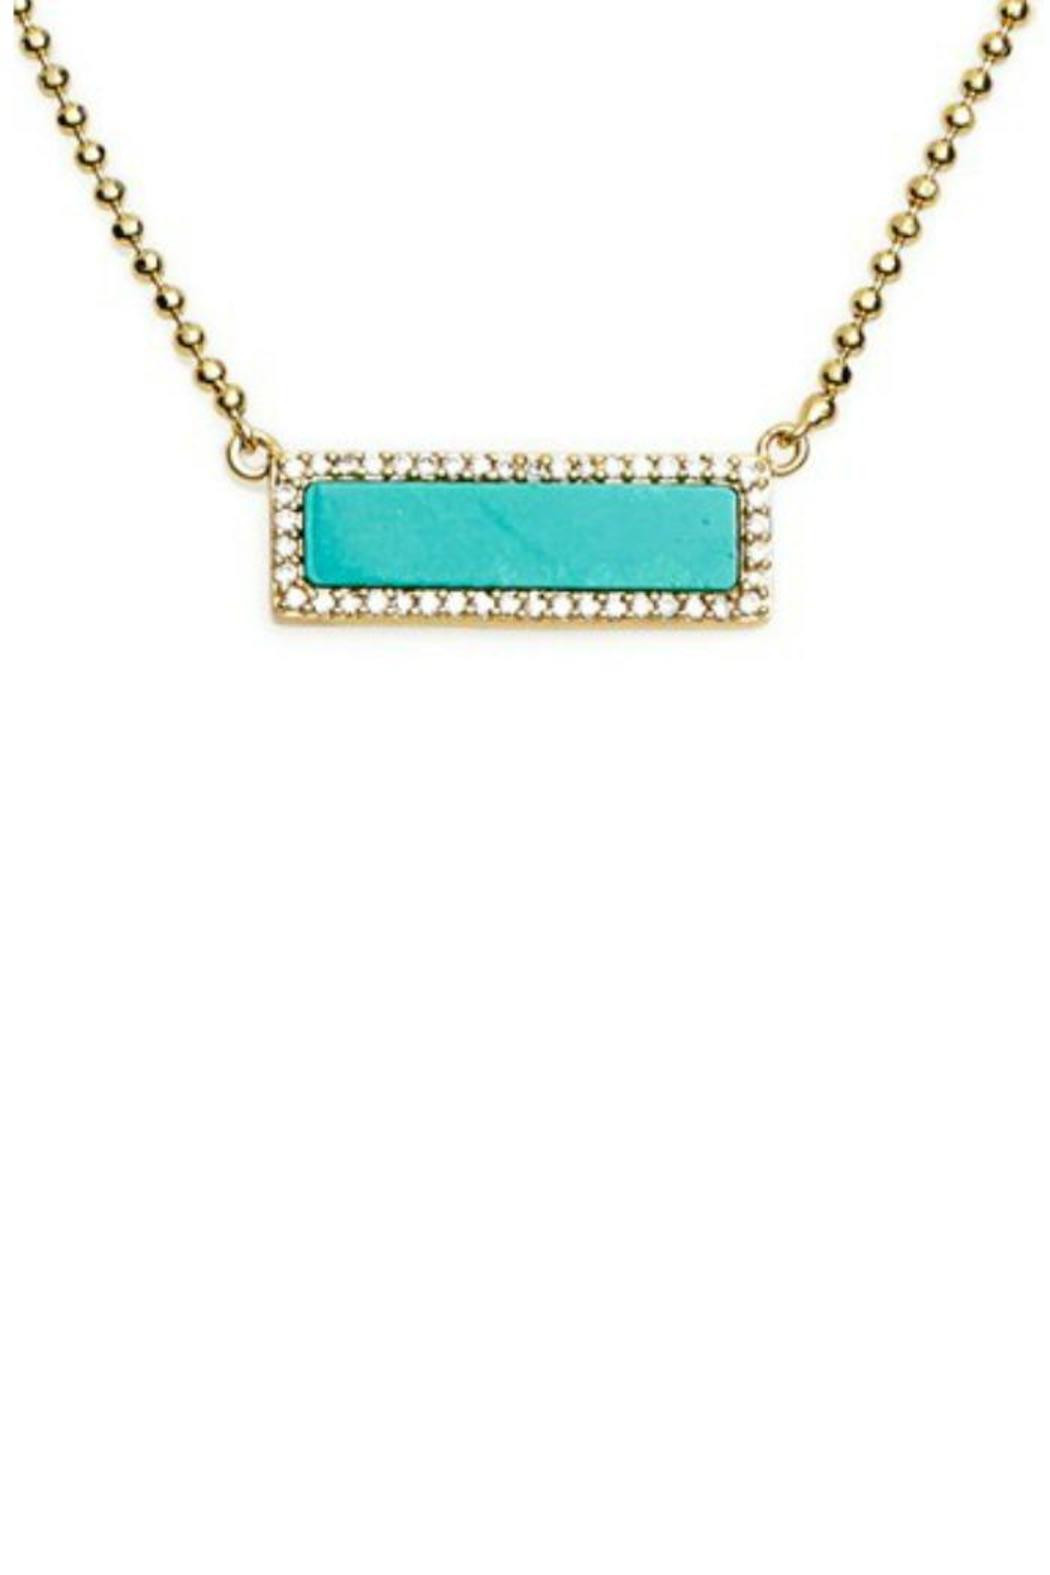 Turquoise Bar Necklace
 Melanie Auld Turquoise Bar Necklace from Dallas by Gemma